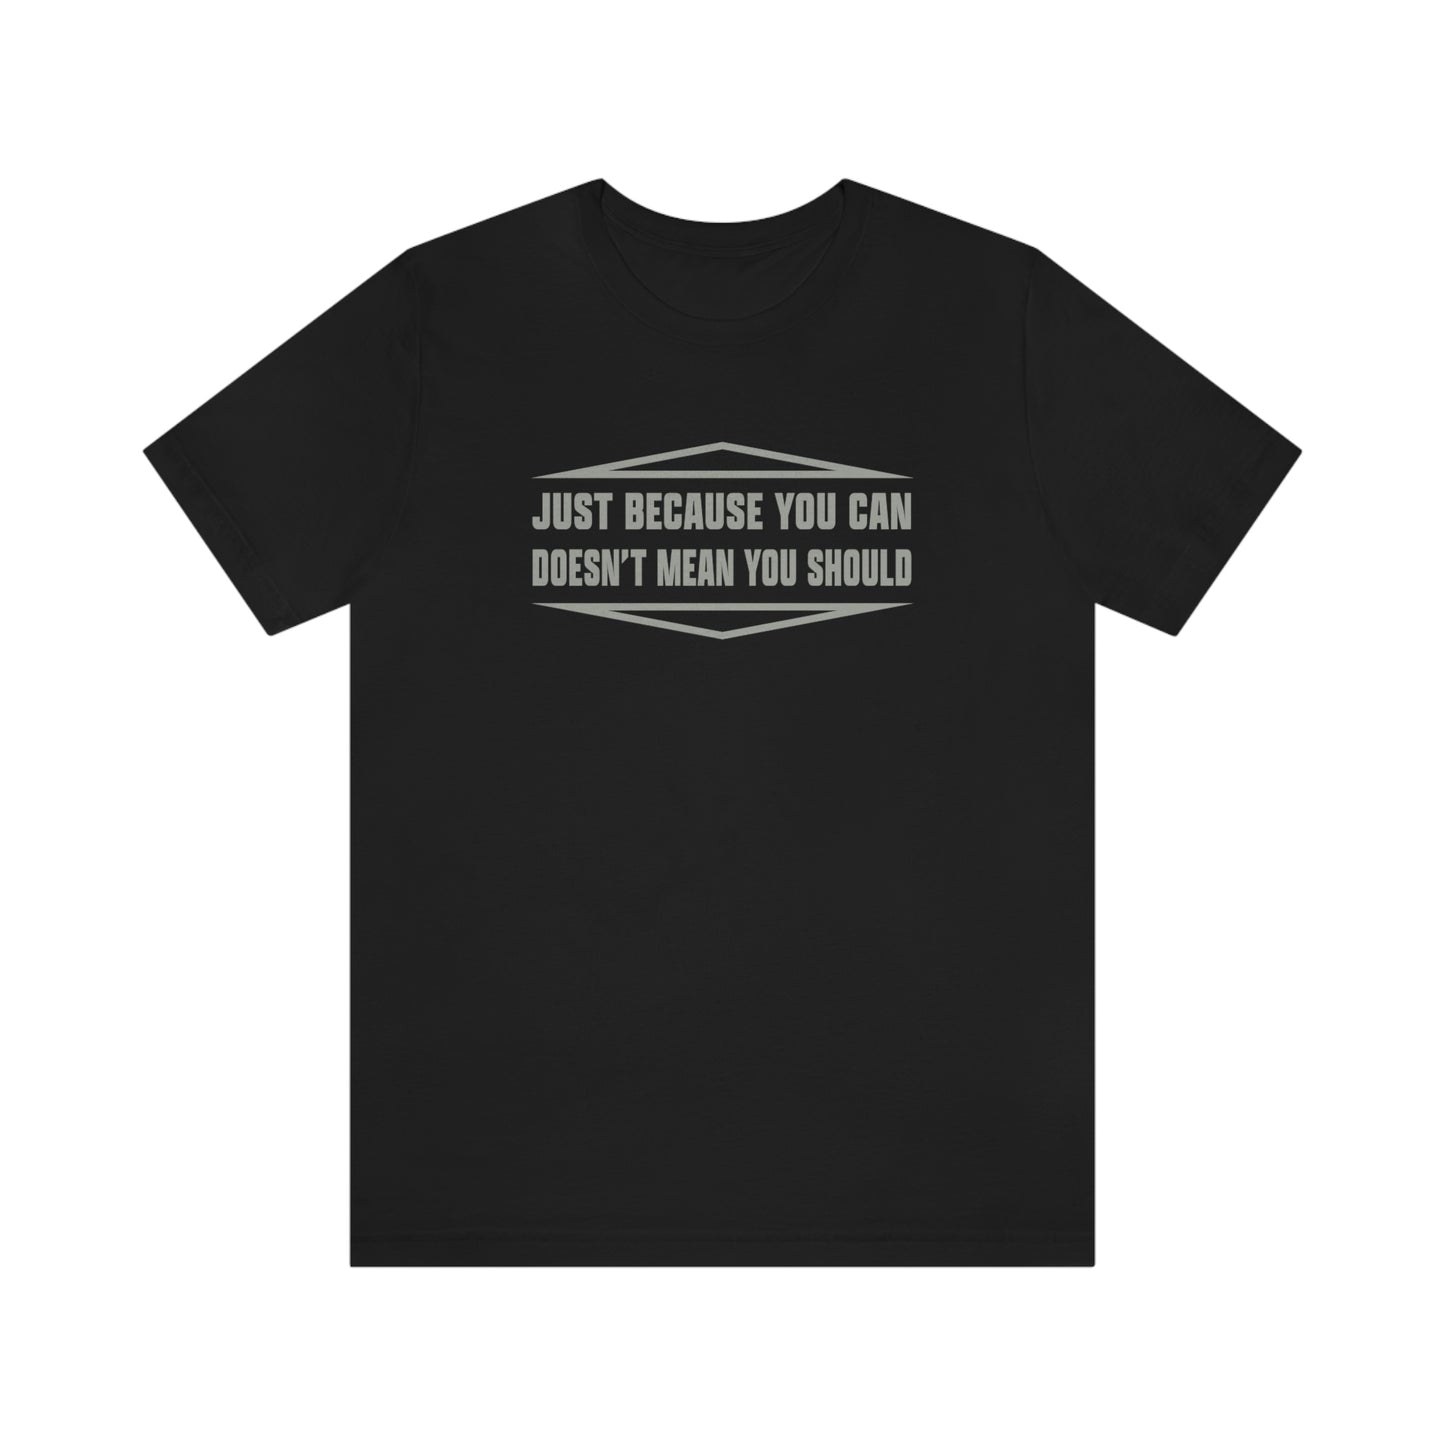 Just Because You Can Doesn't Mean You Should - Unisex T-Shirt